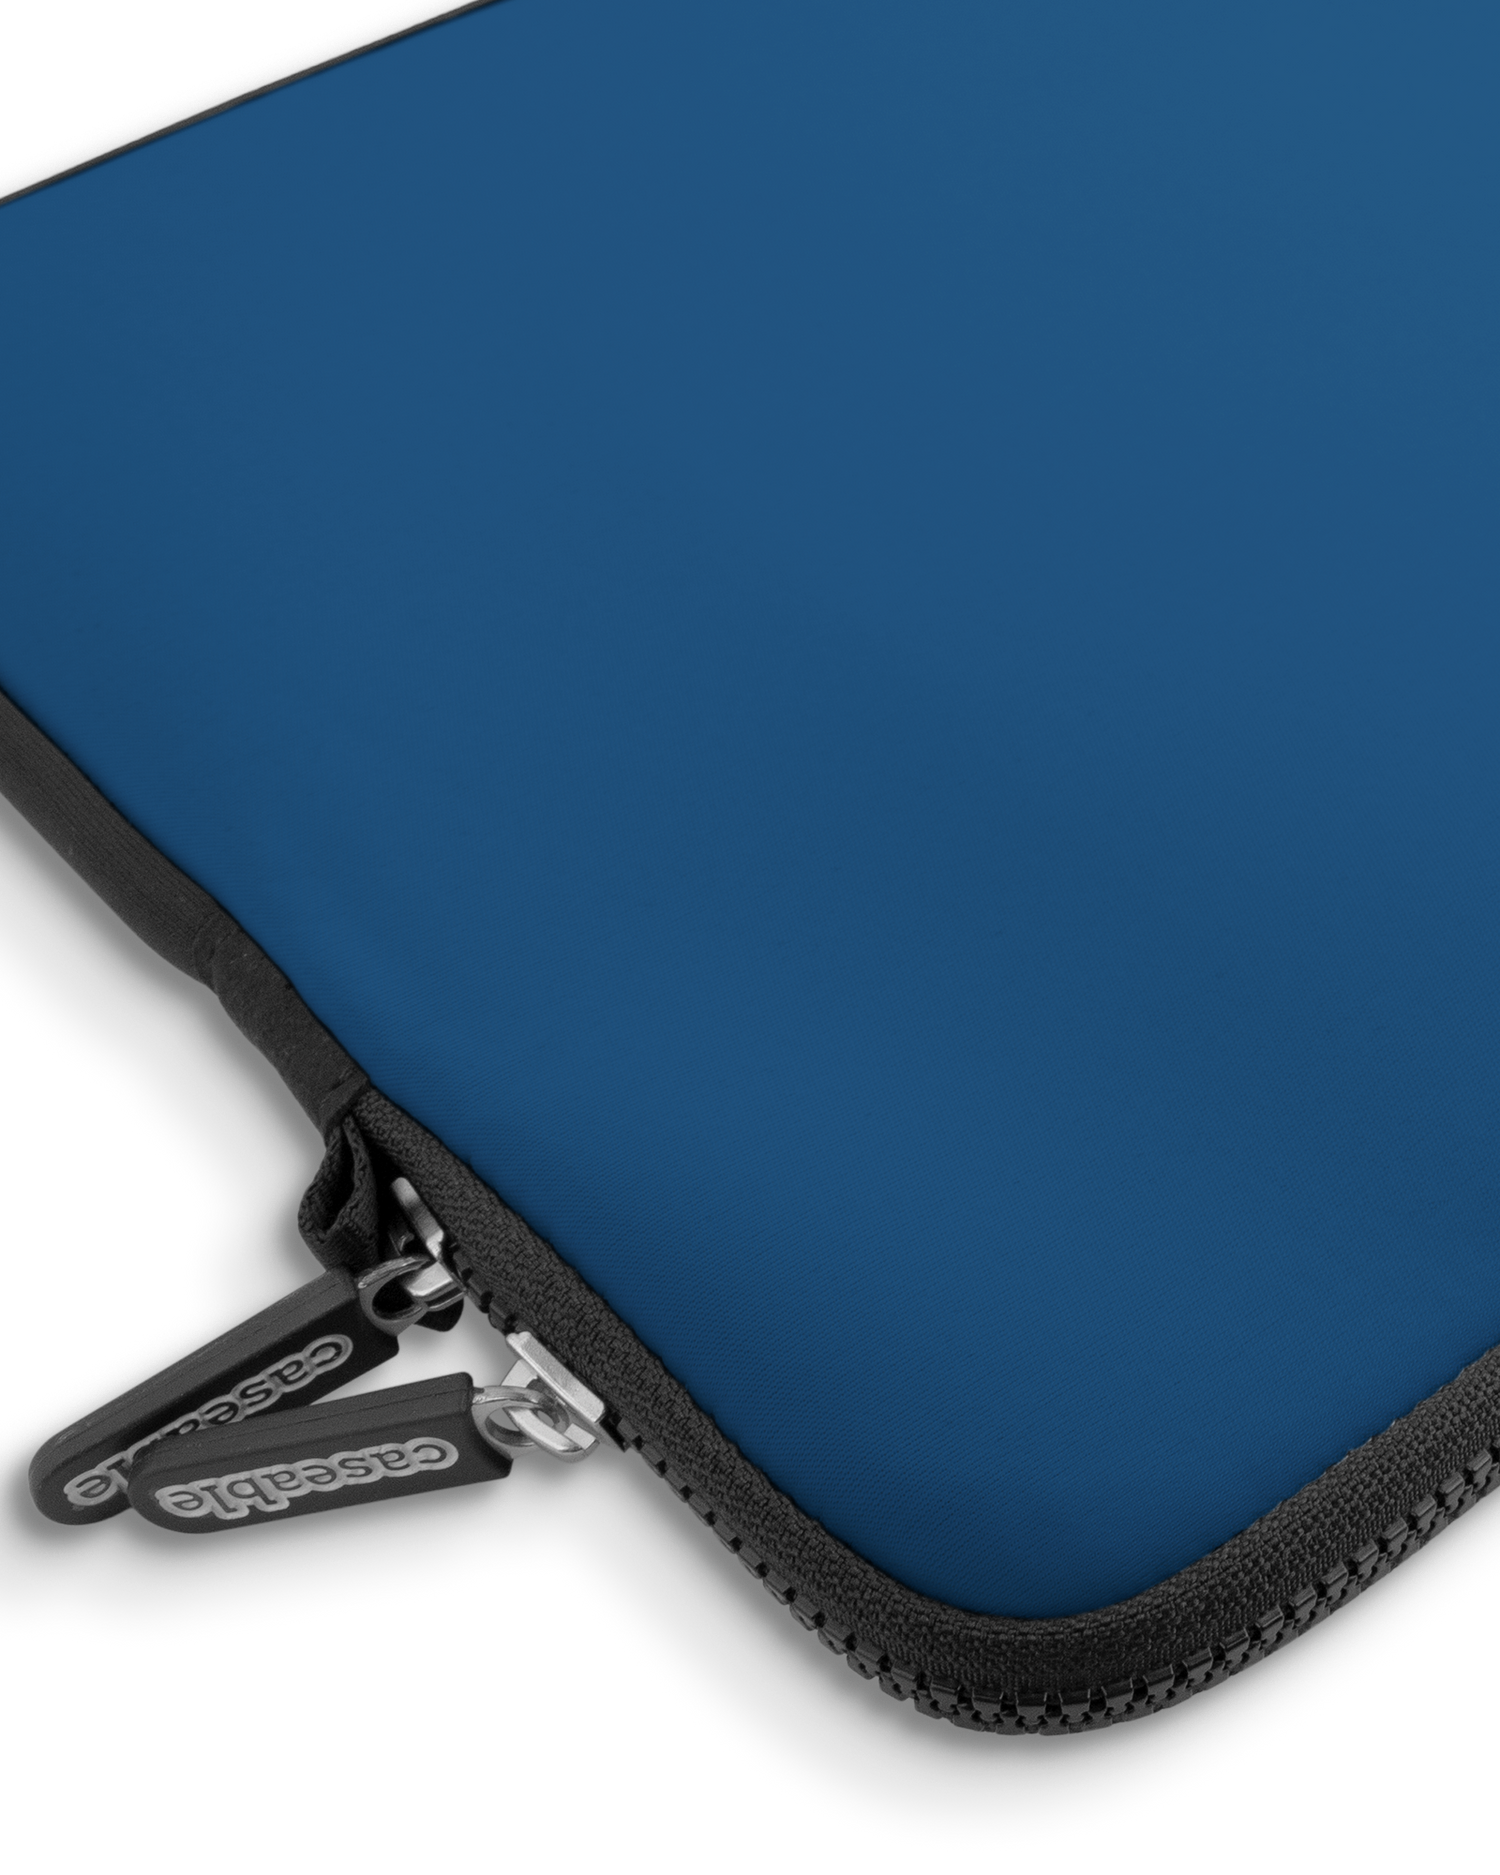 CLASSIC BLUE Premium Laptop Bag 15 inch with device inside